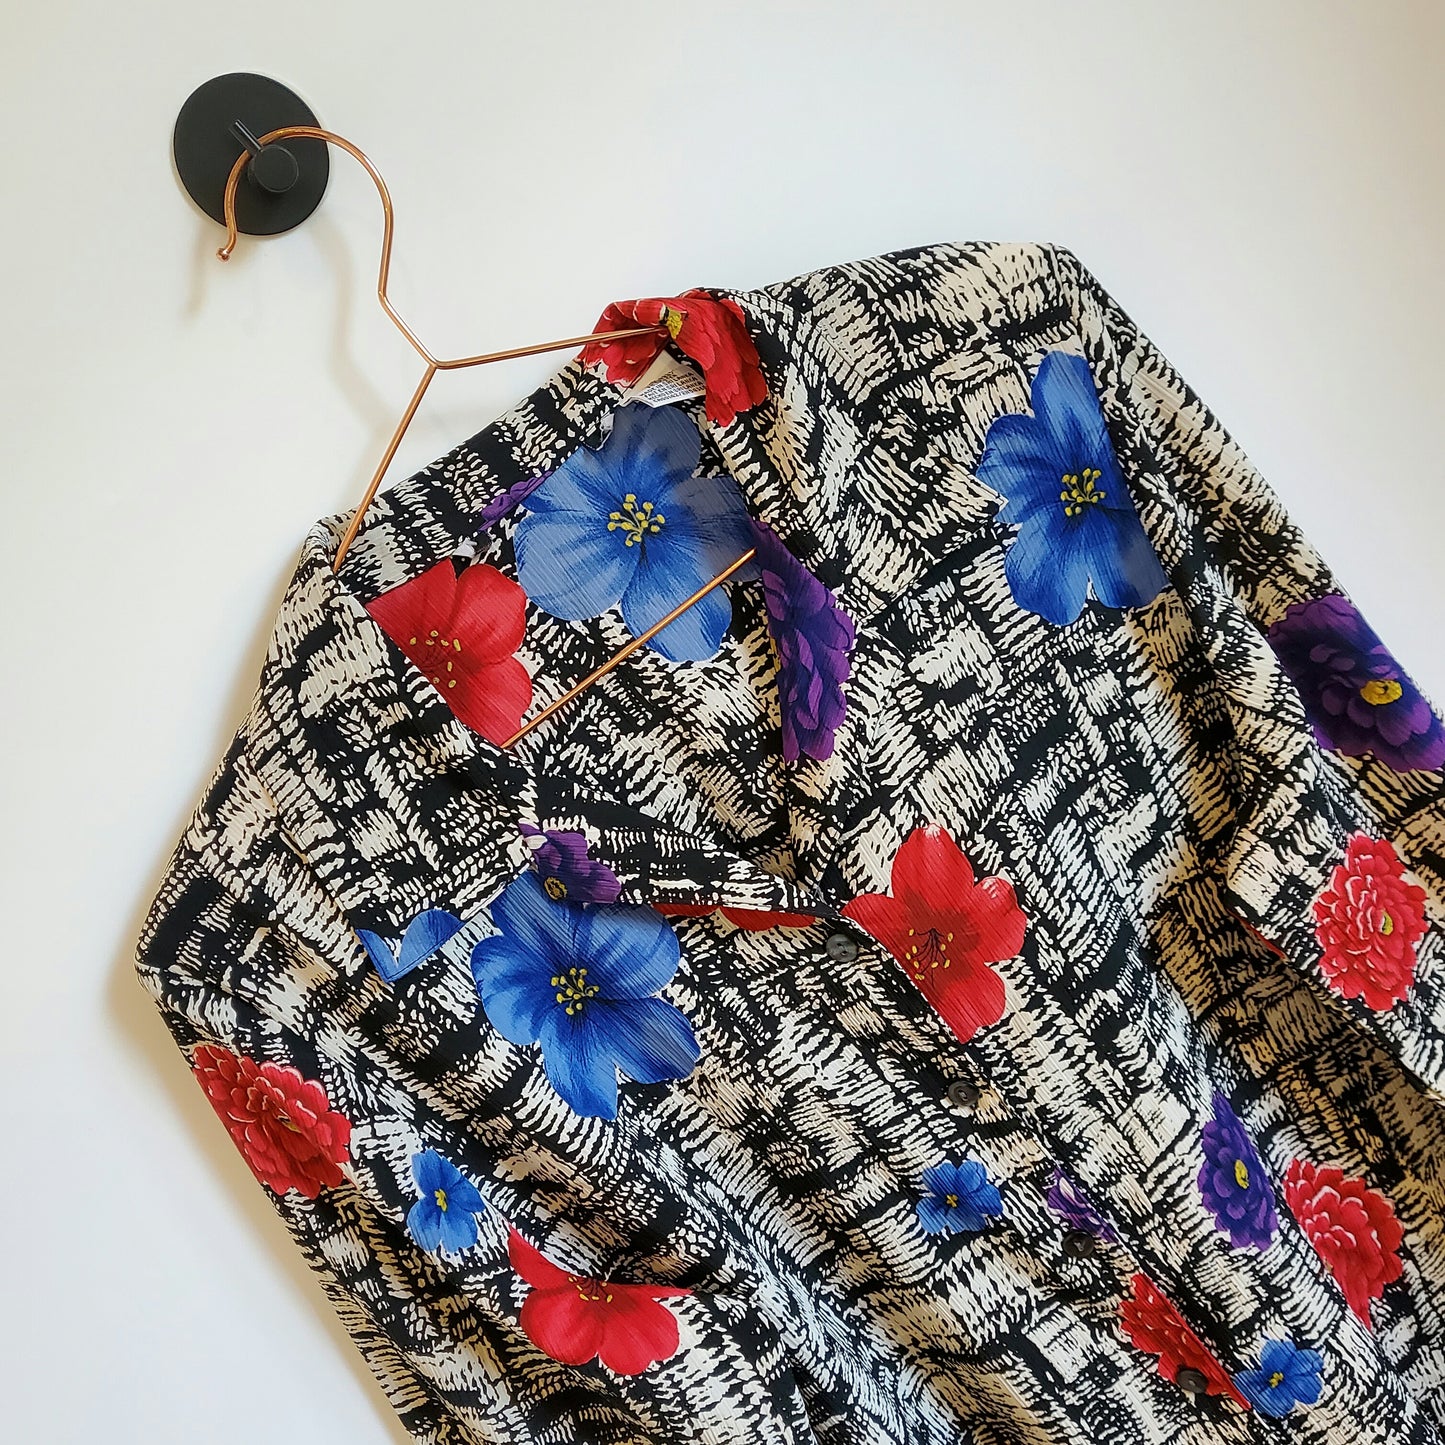 Vintage 80s Floral Blouse Black and White Size 10-12